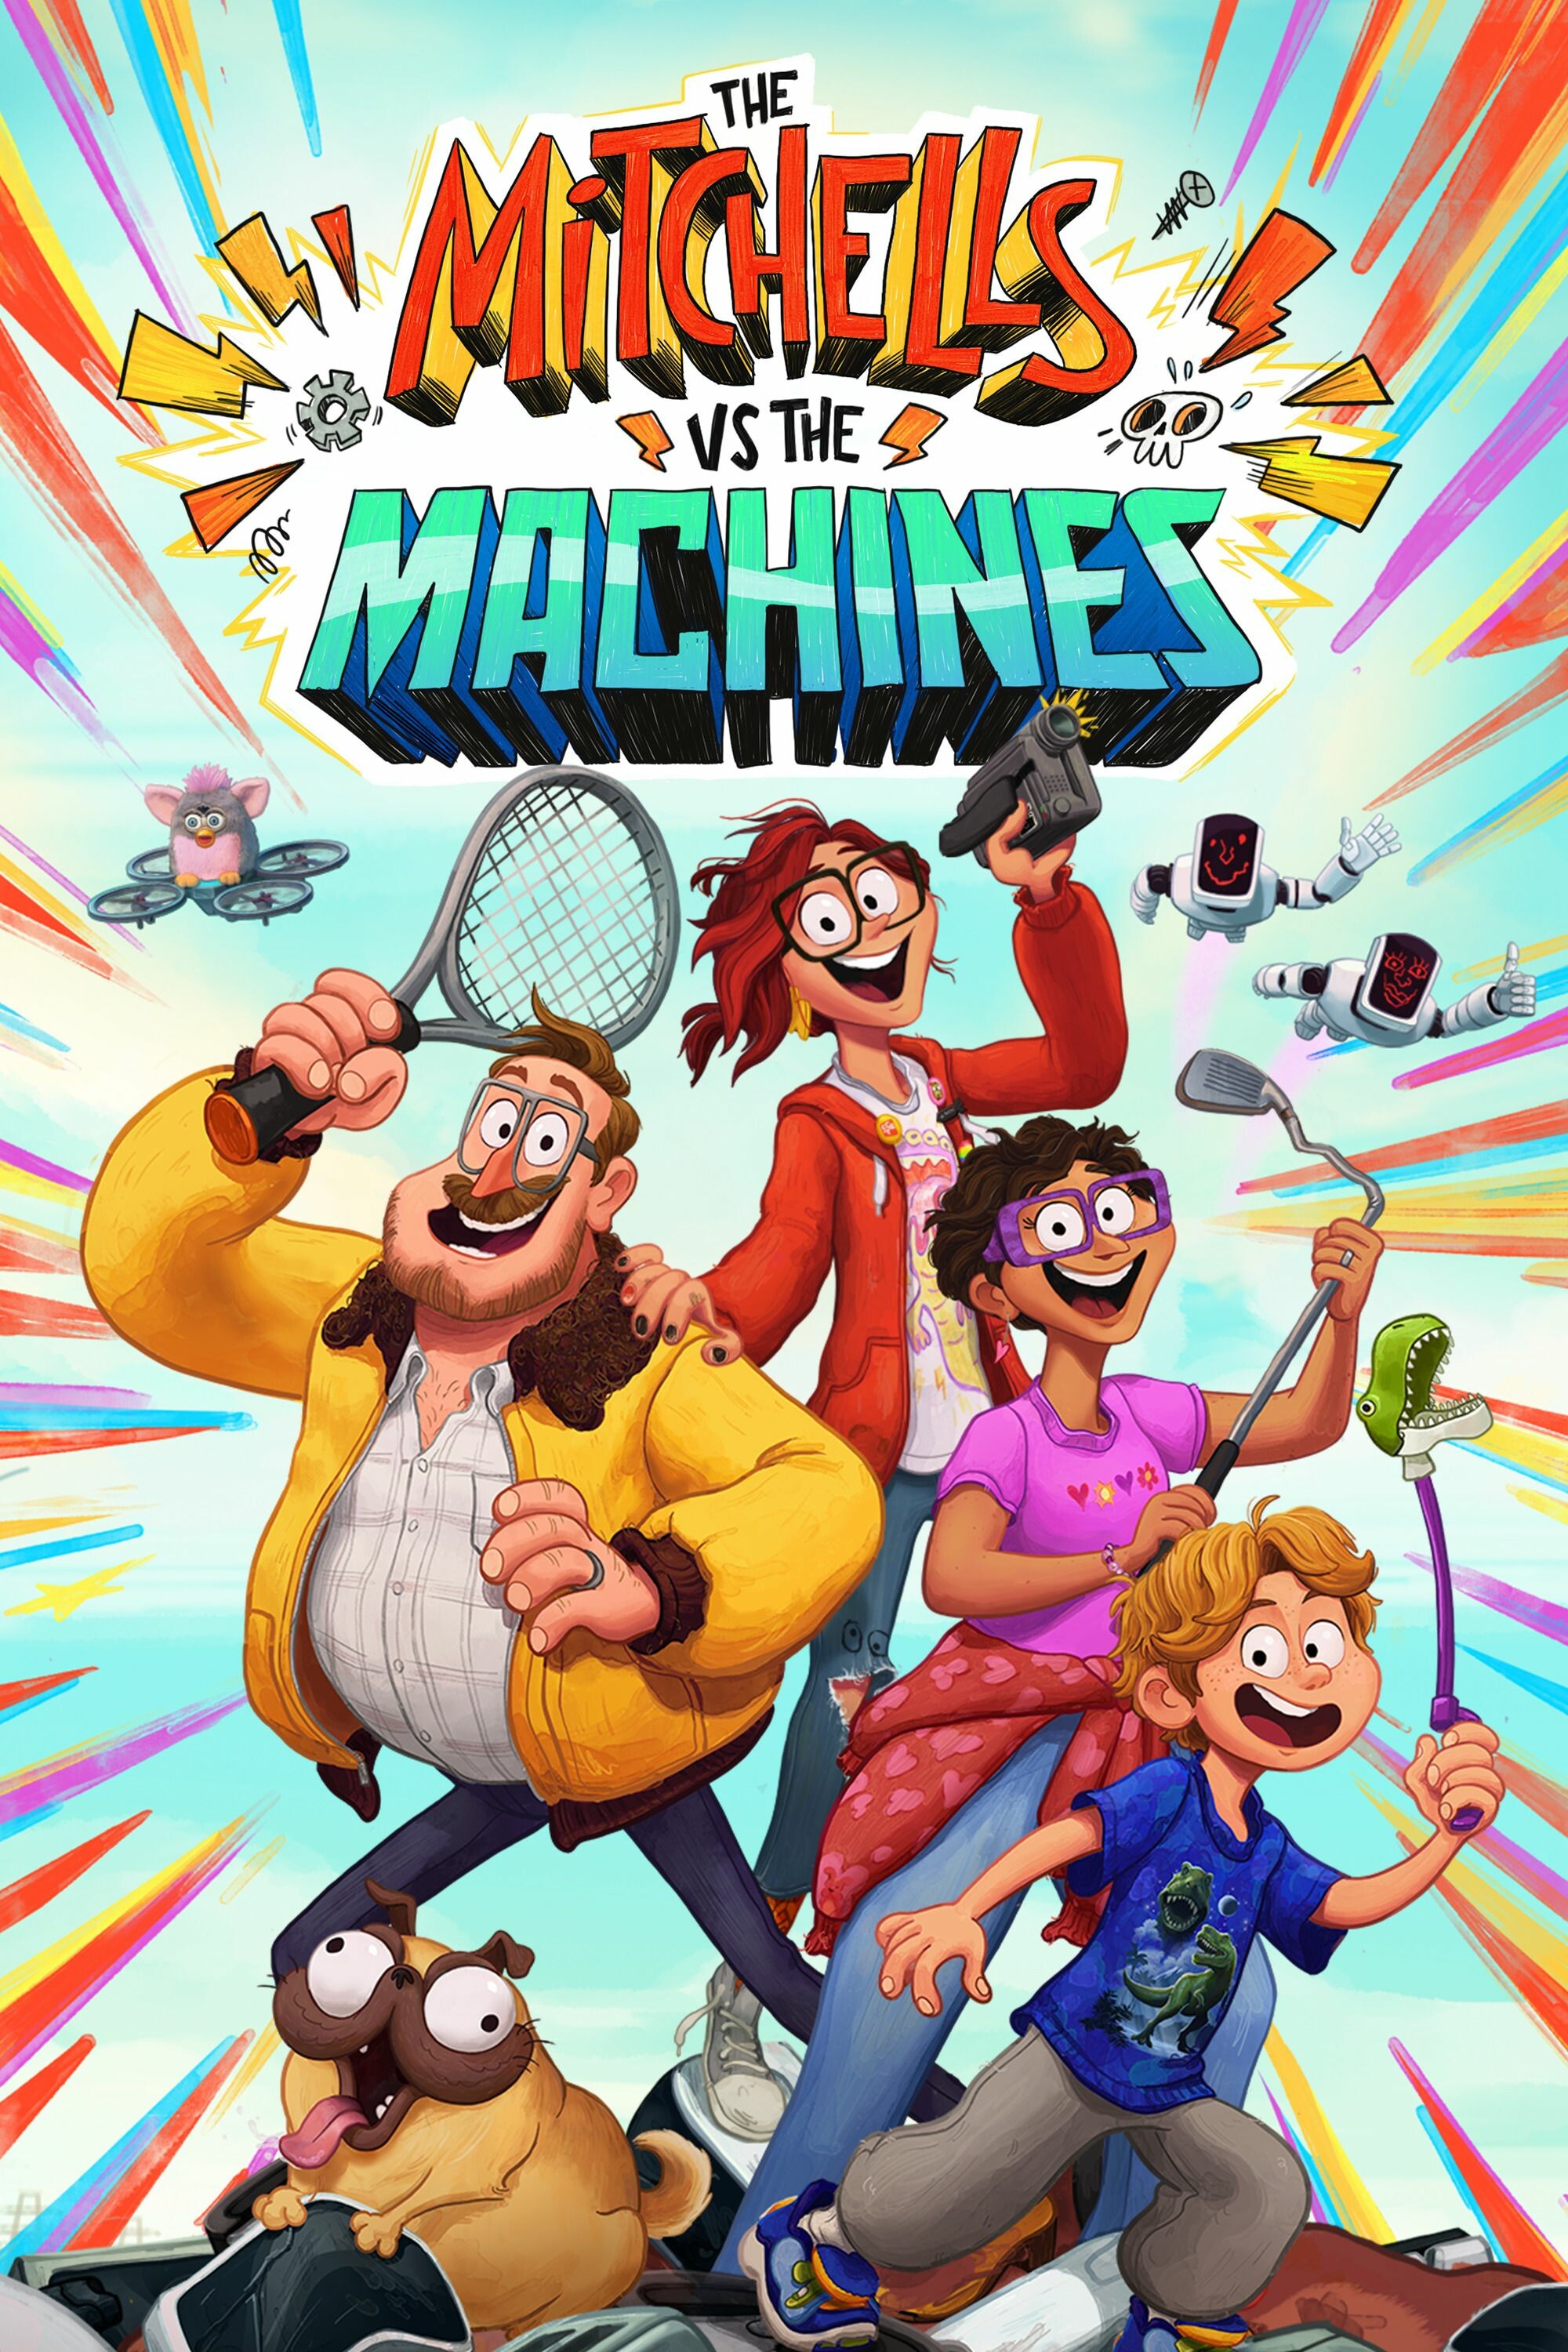 The Mitchells vs. the Machines: The film follows the dysfunctional Mitchell family. 2000x3000 HD Wallpaper.